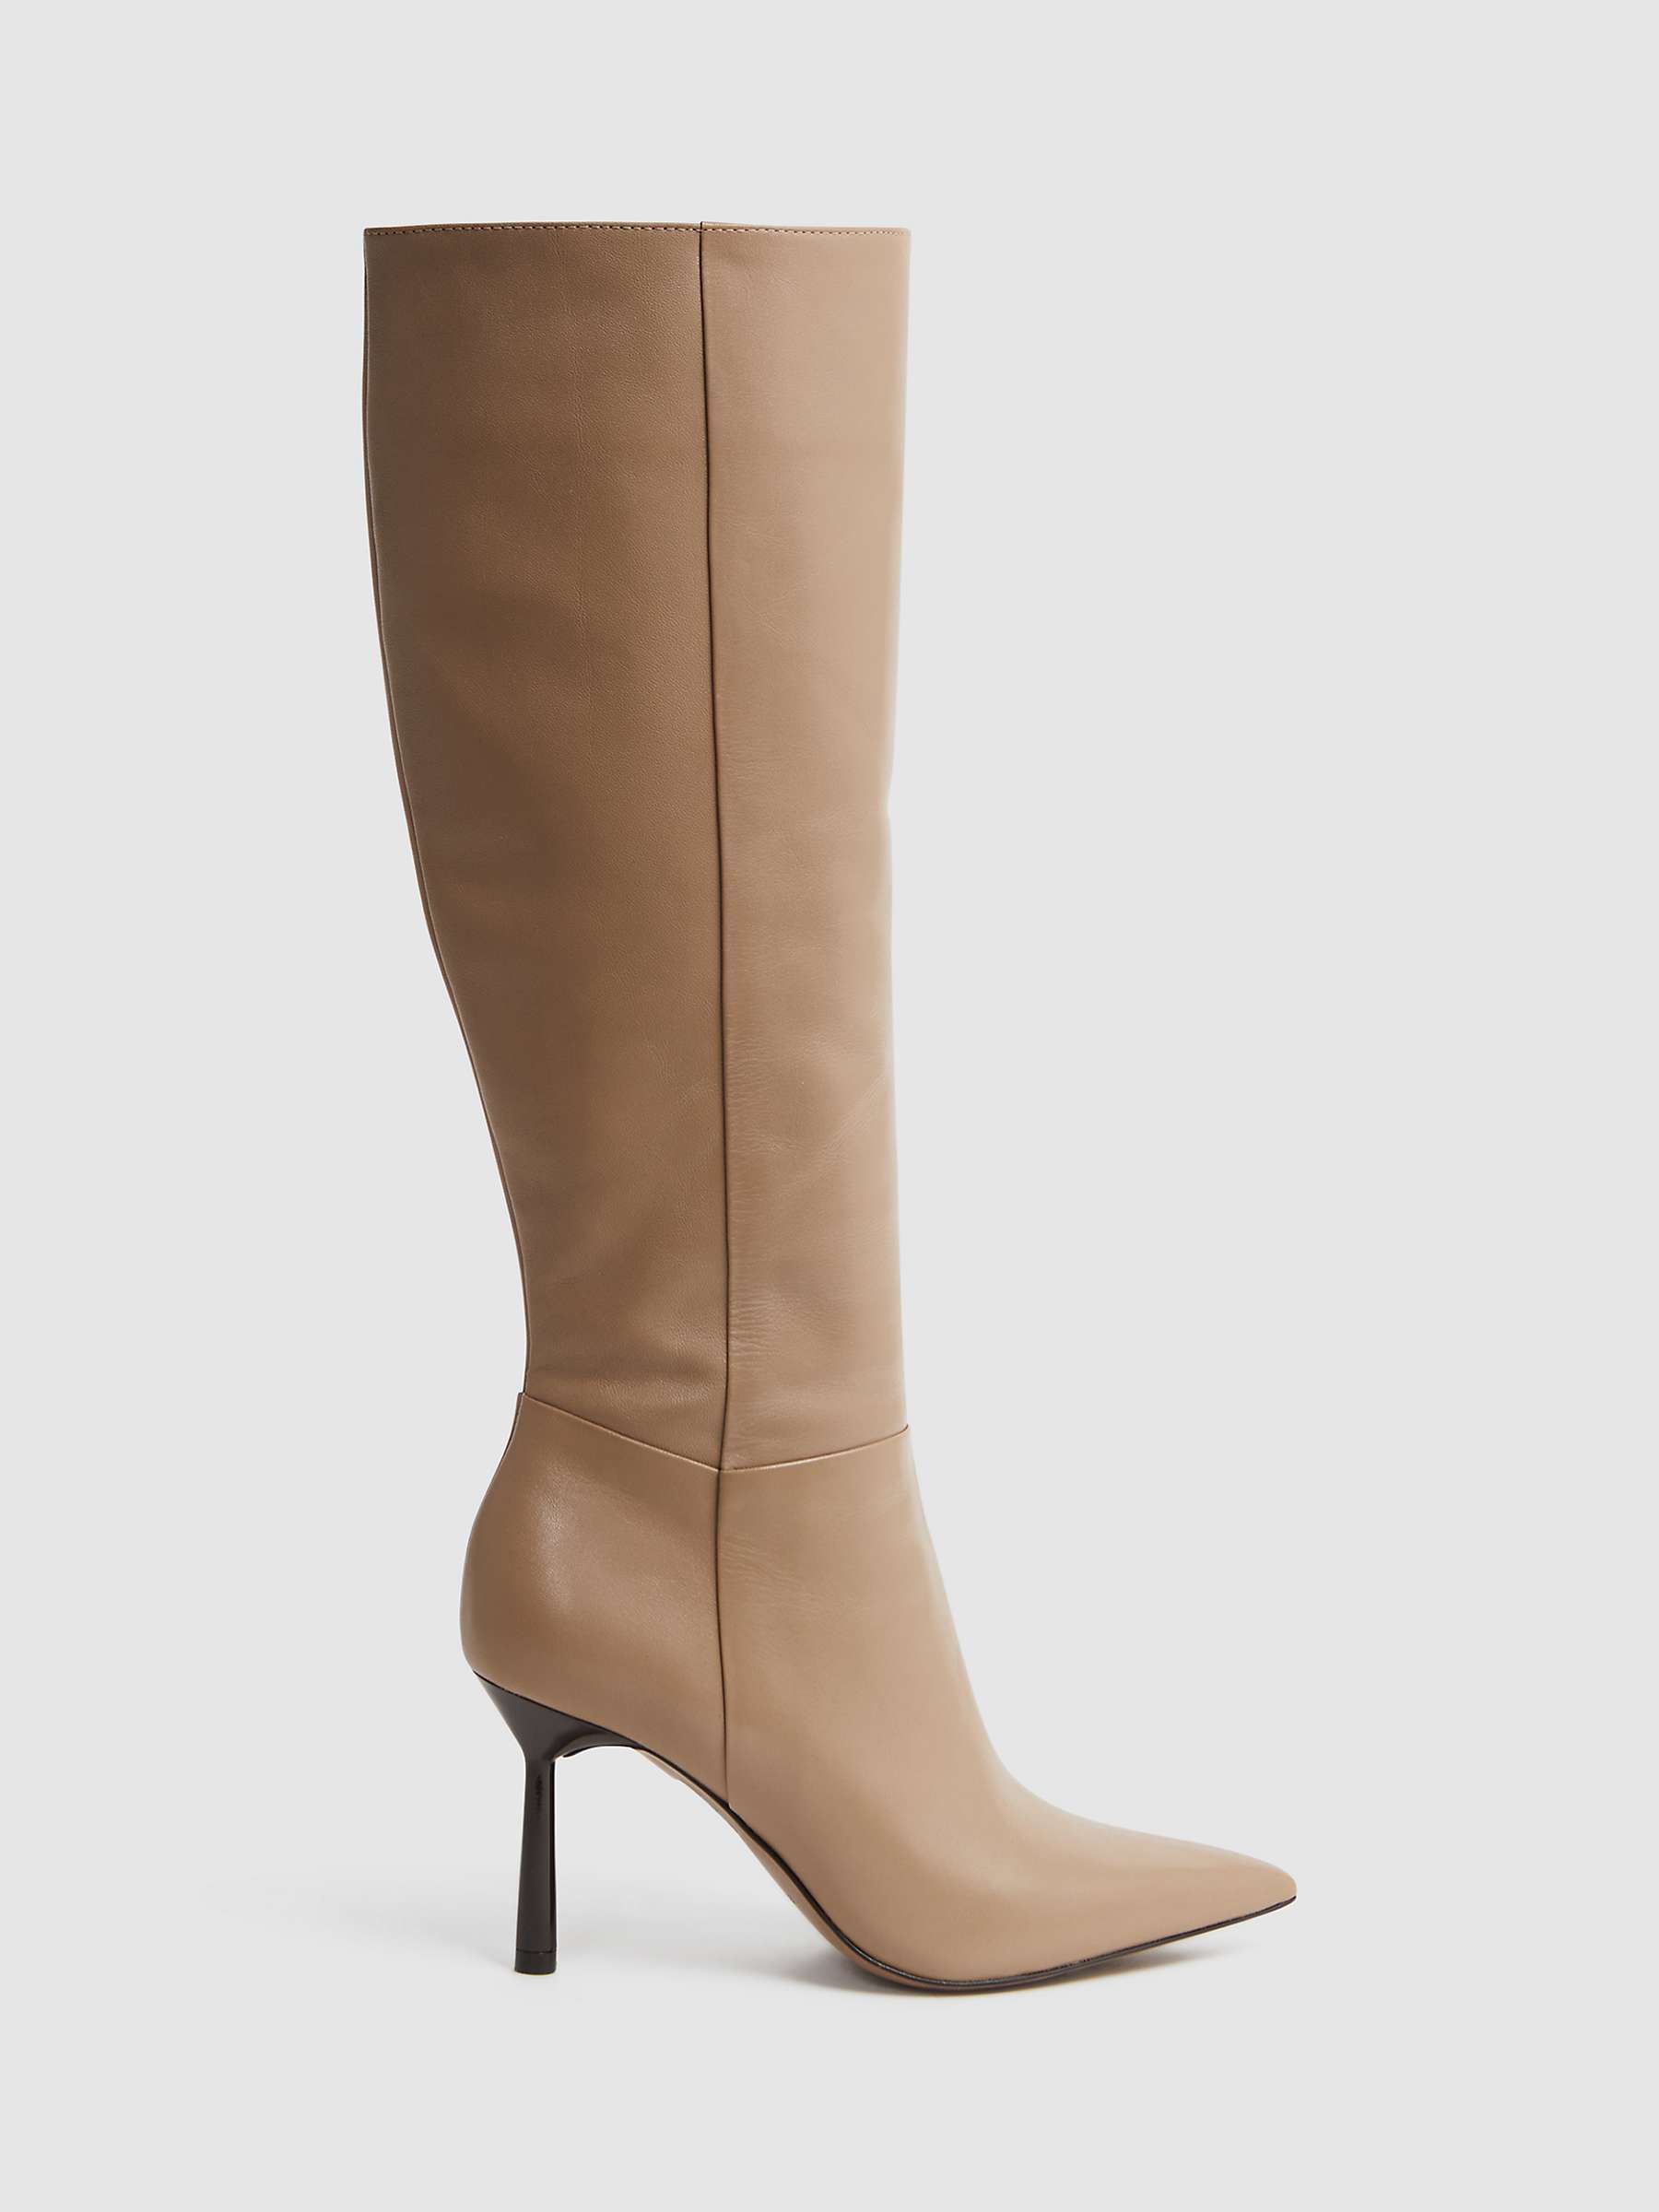 Buy Reiss Gracyn High Heel Leather Knee High Boots Online at johnlewis.com